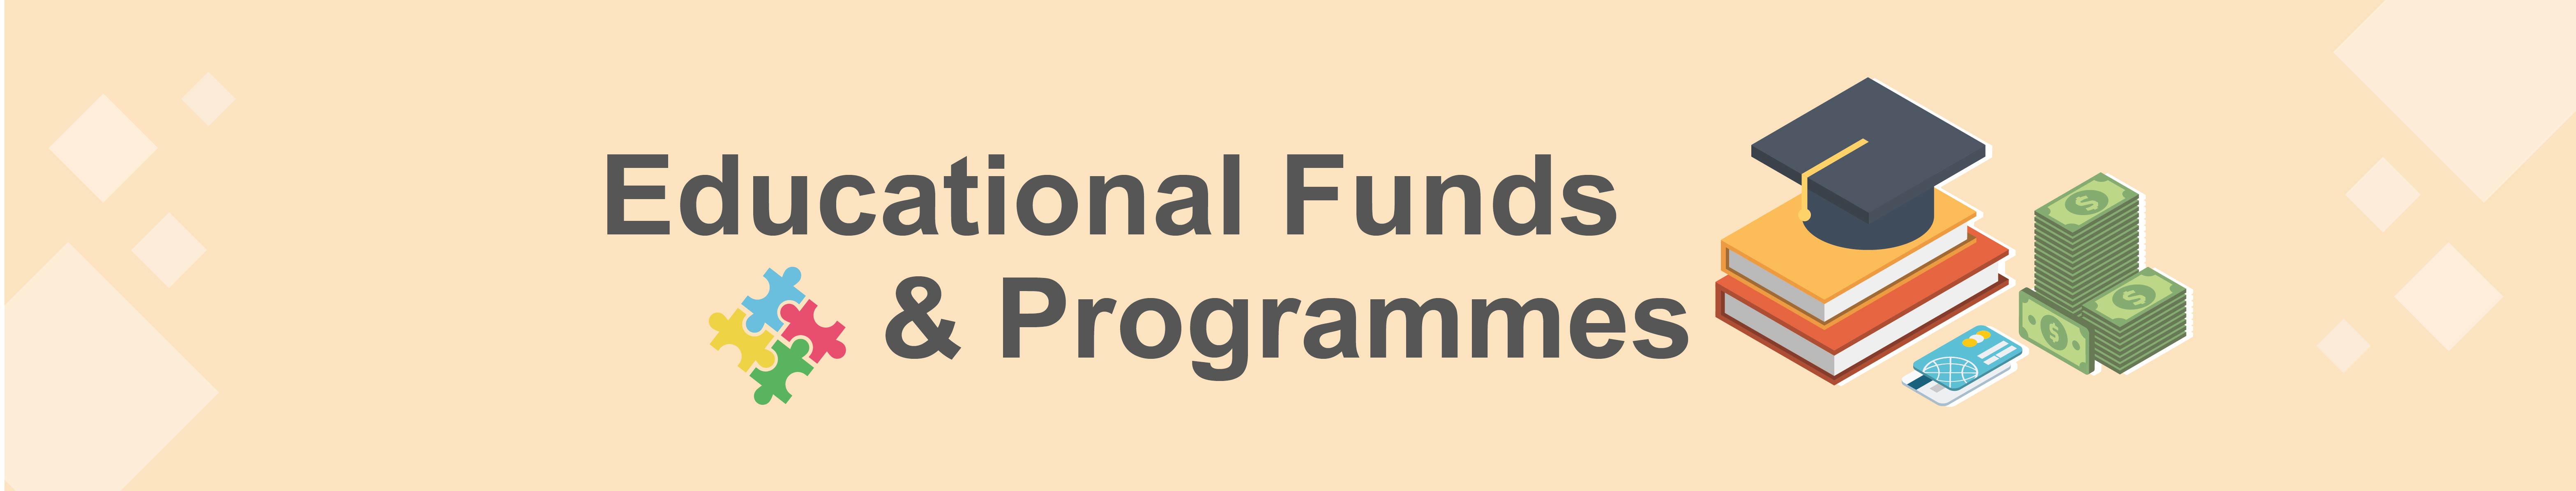 Educational Funds & Programmes